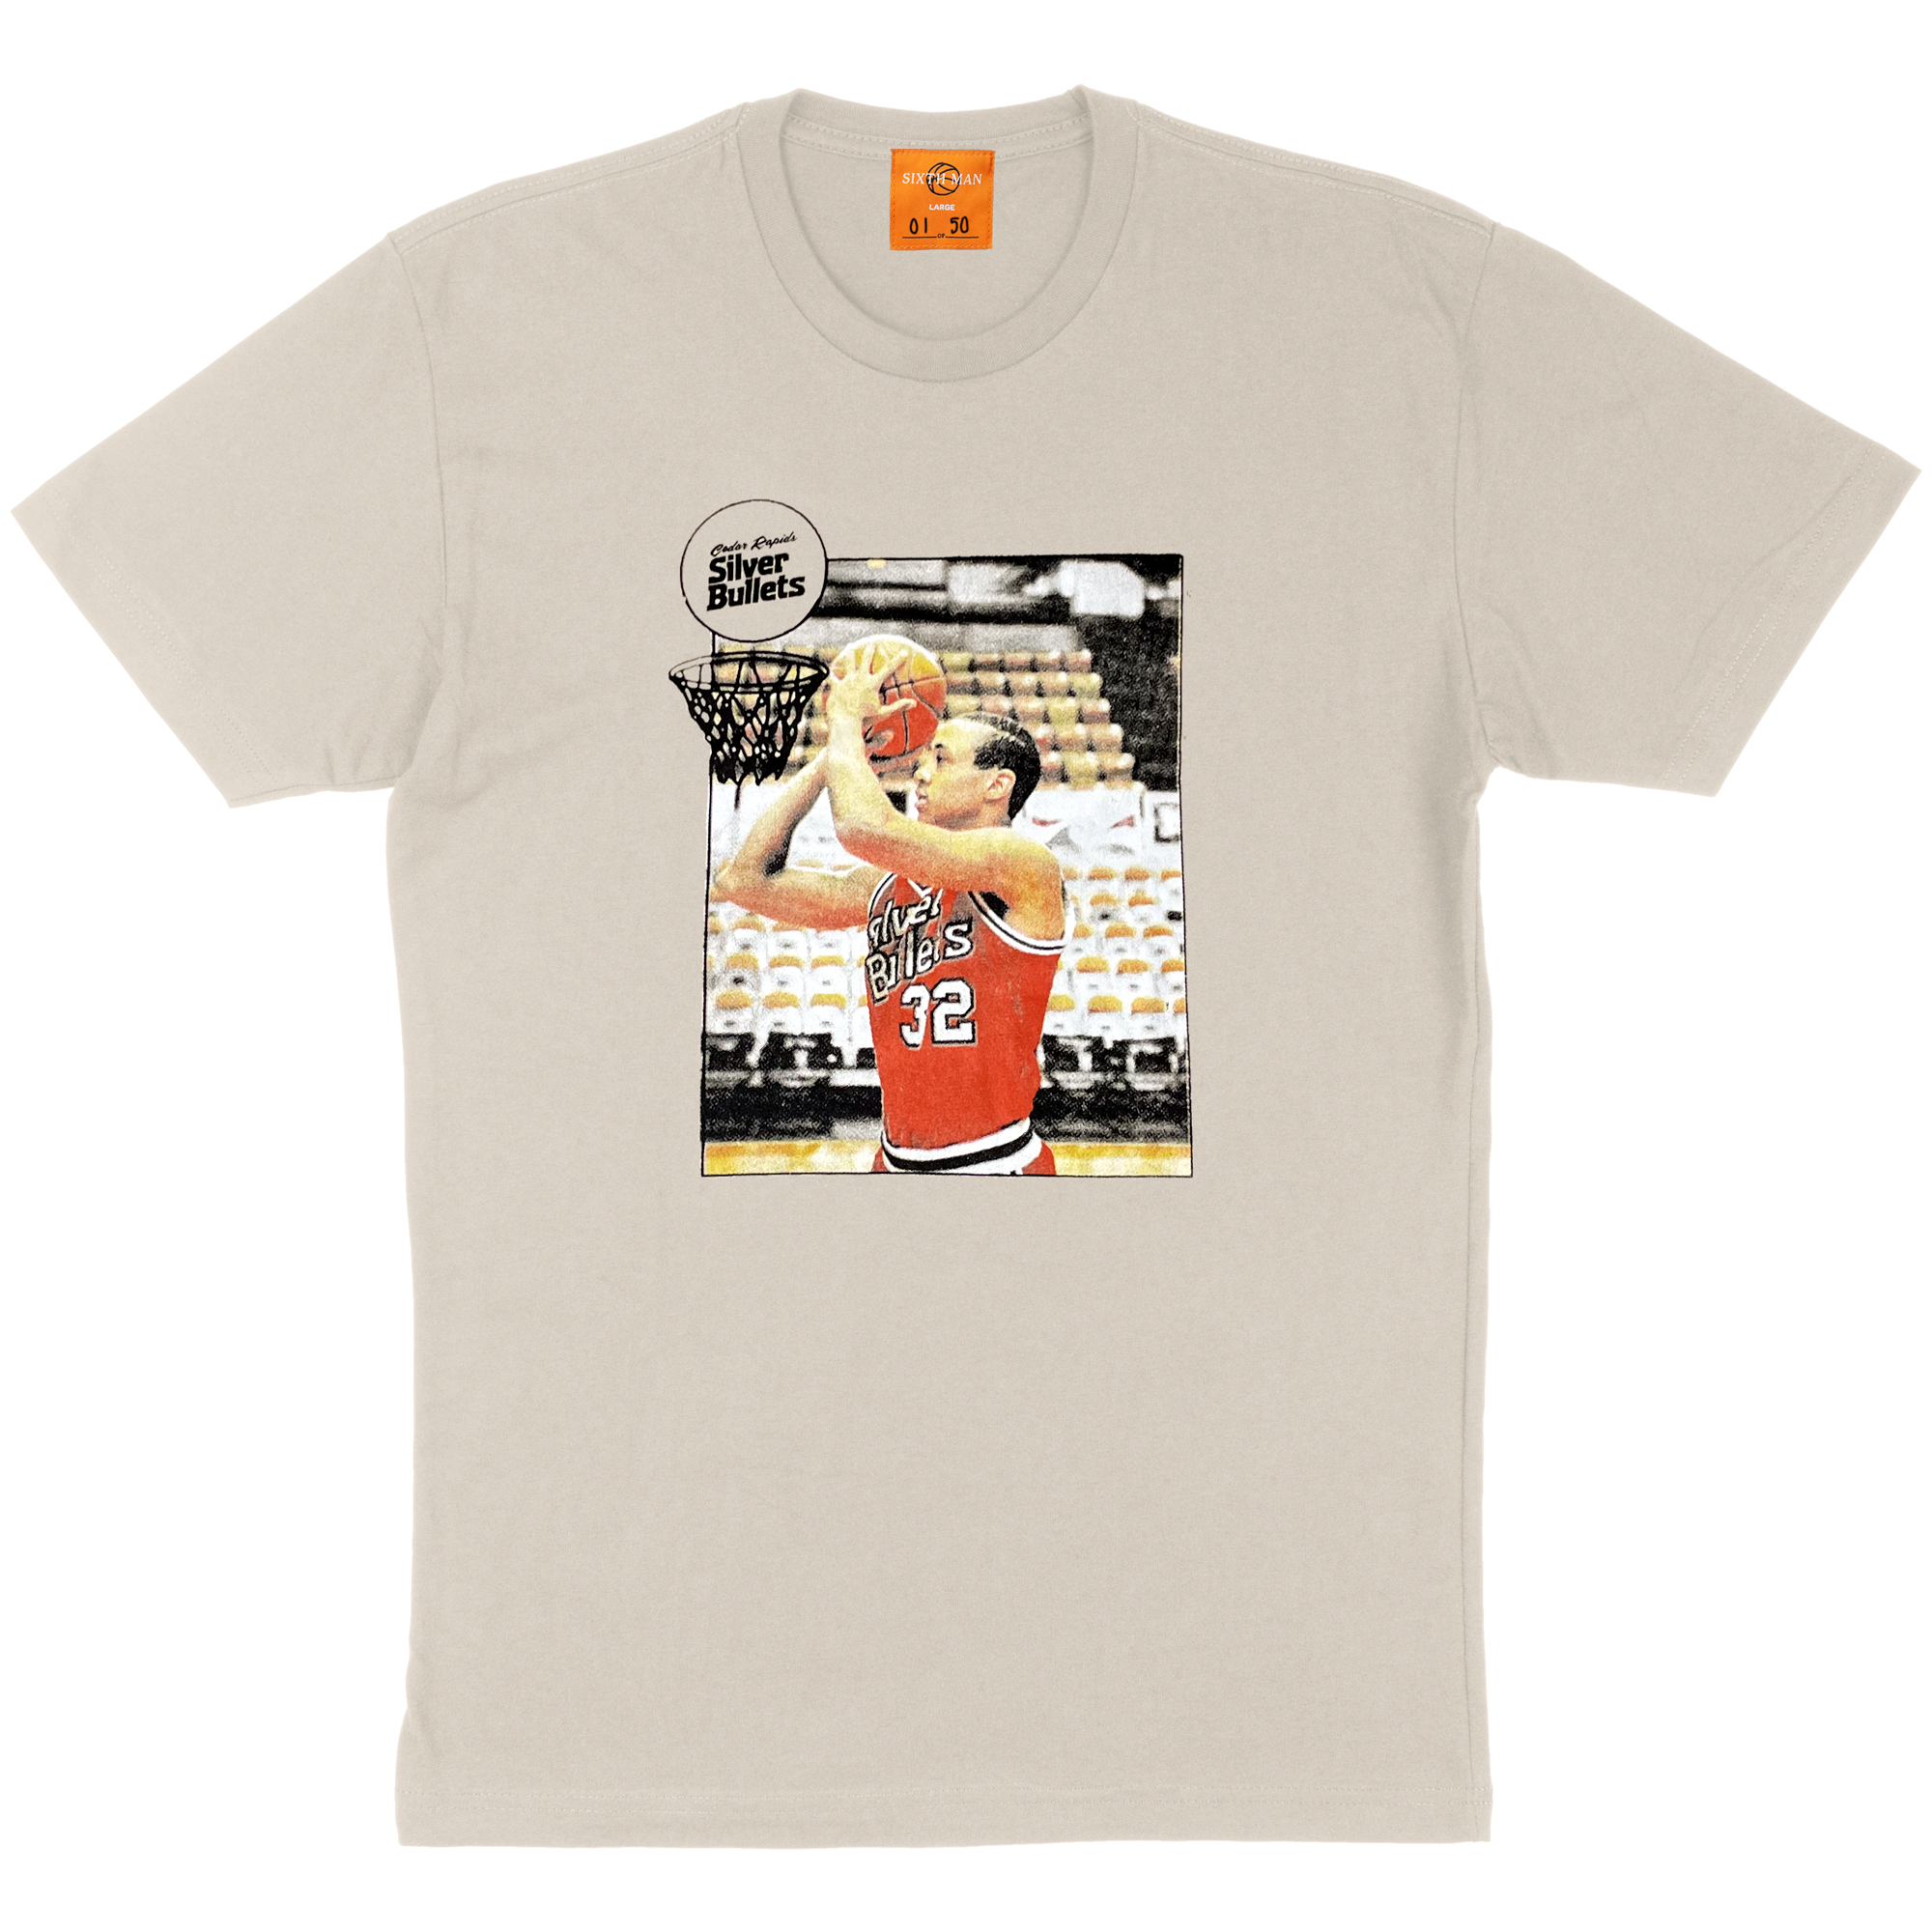 cream colored t-shirt featuring an image of NBA player John Starks in action on the court. 